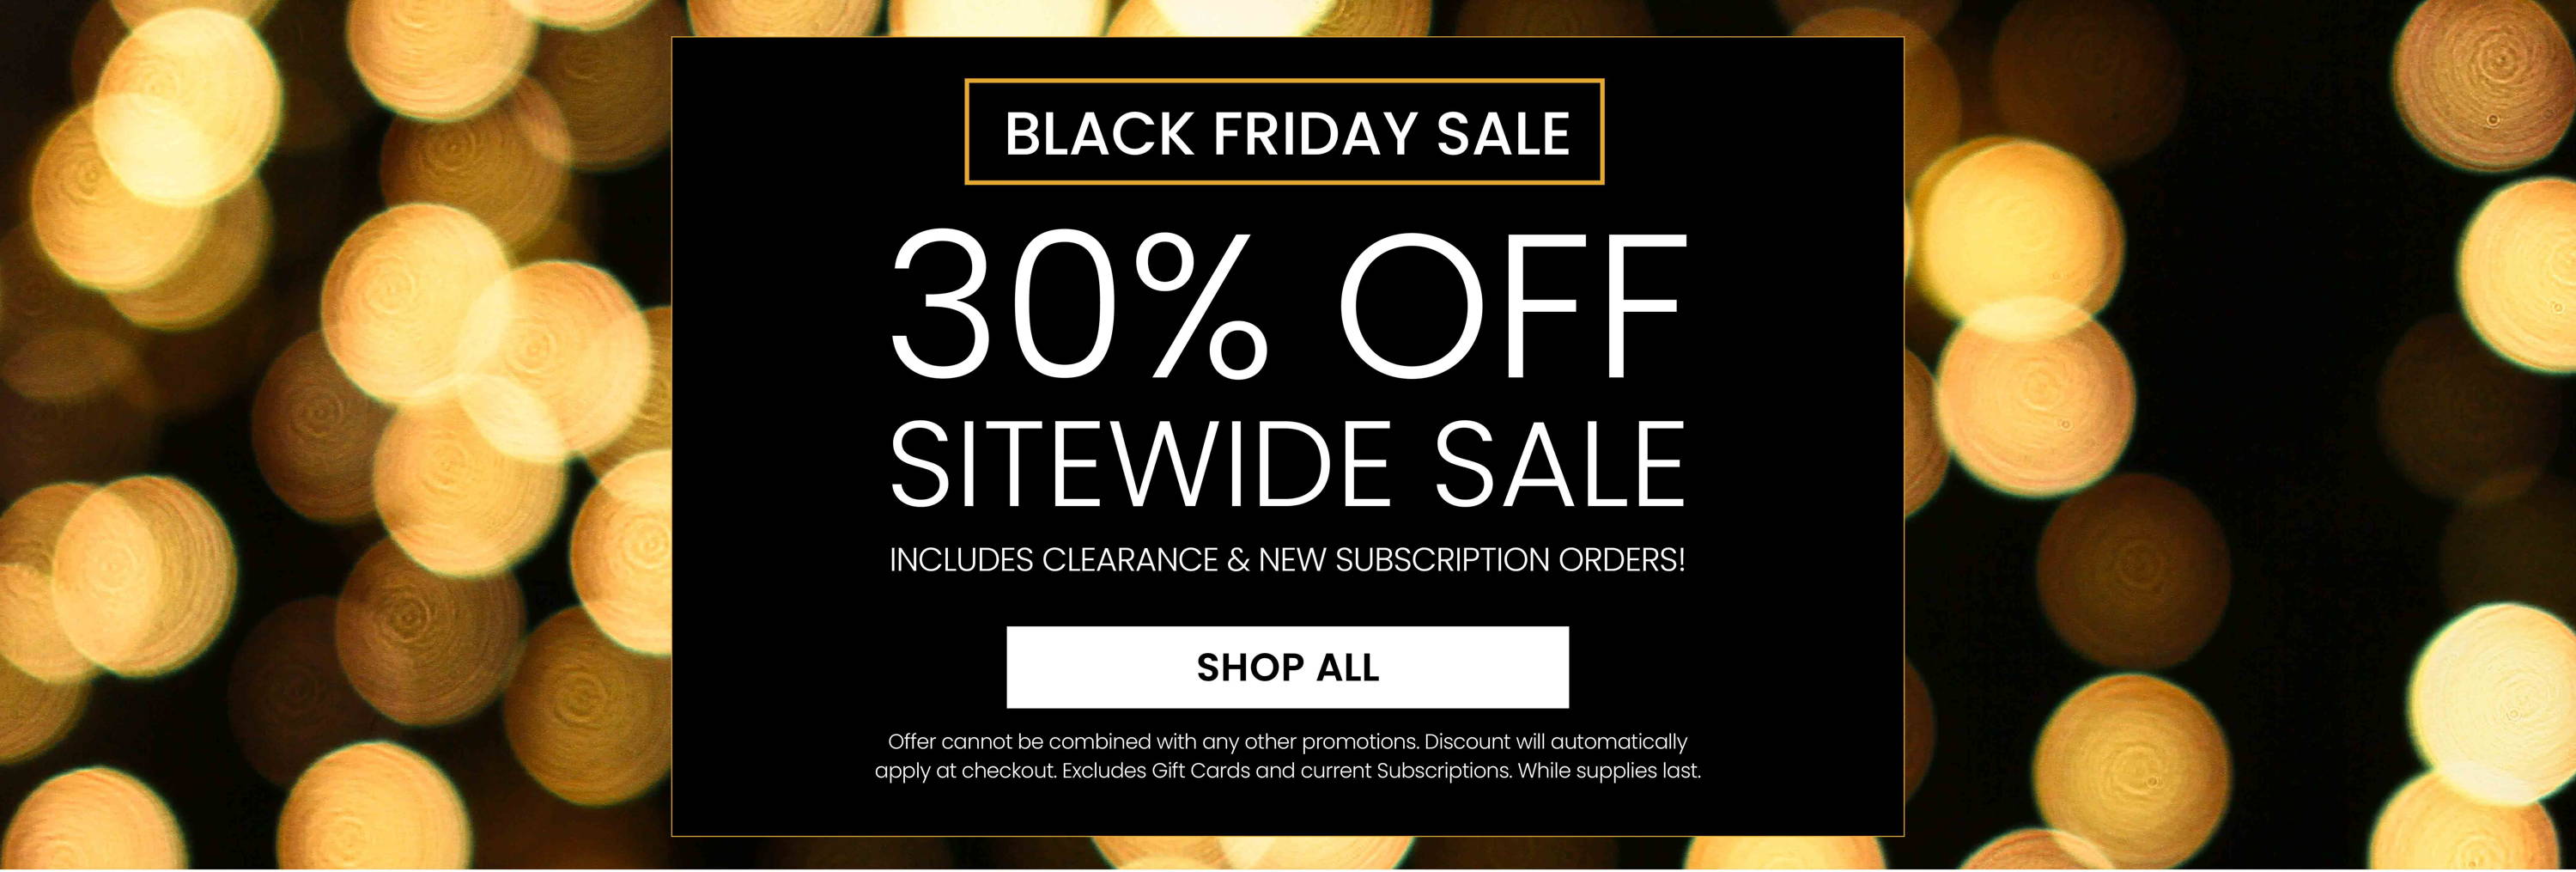  Black Friday Sale. 30% Off Sitewide Sale. Includes Clearance and New Subscriptions.